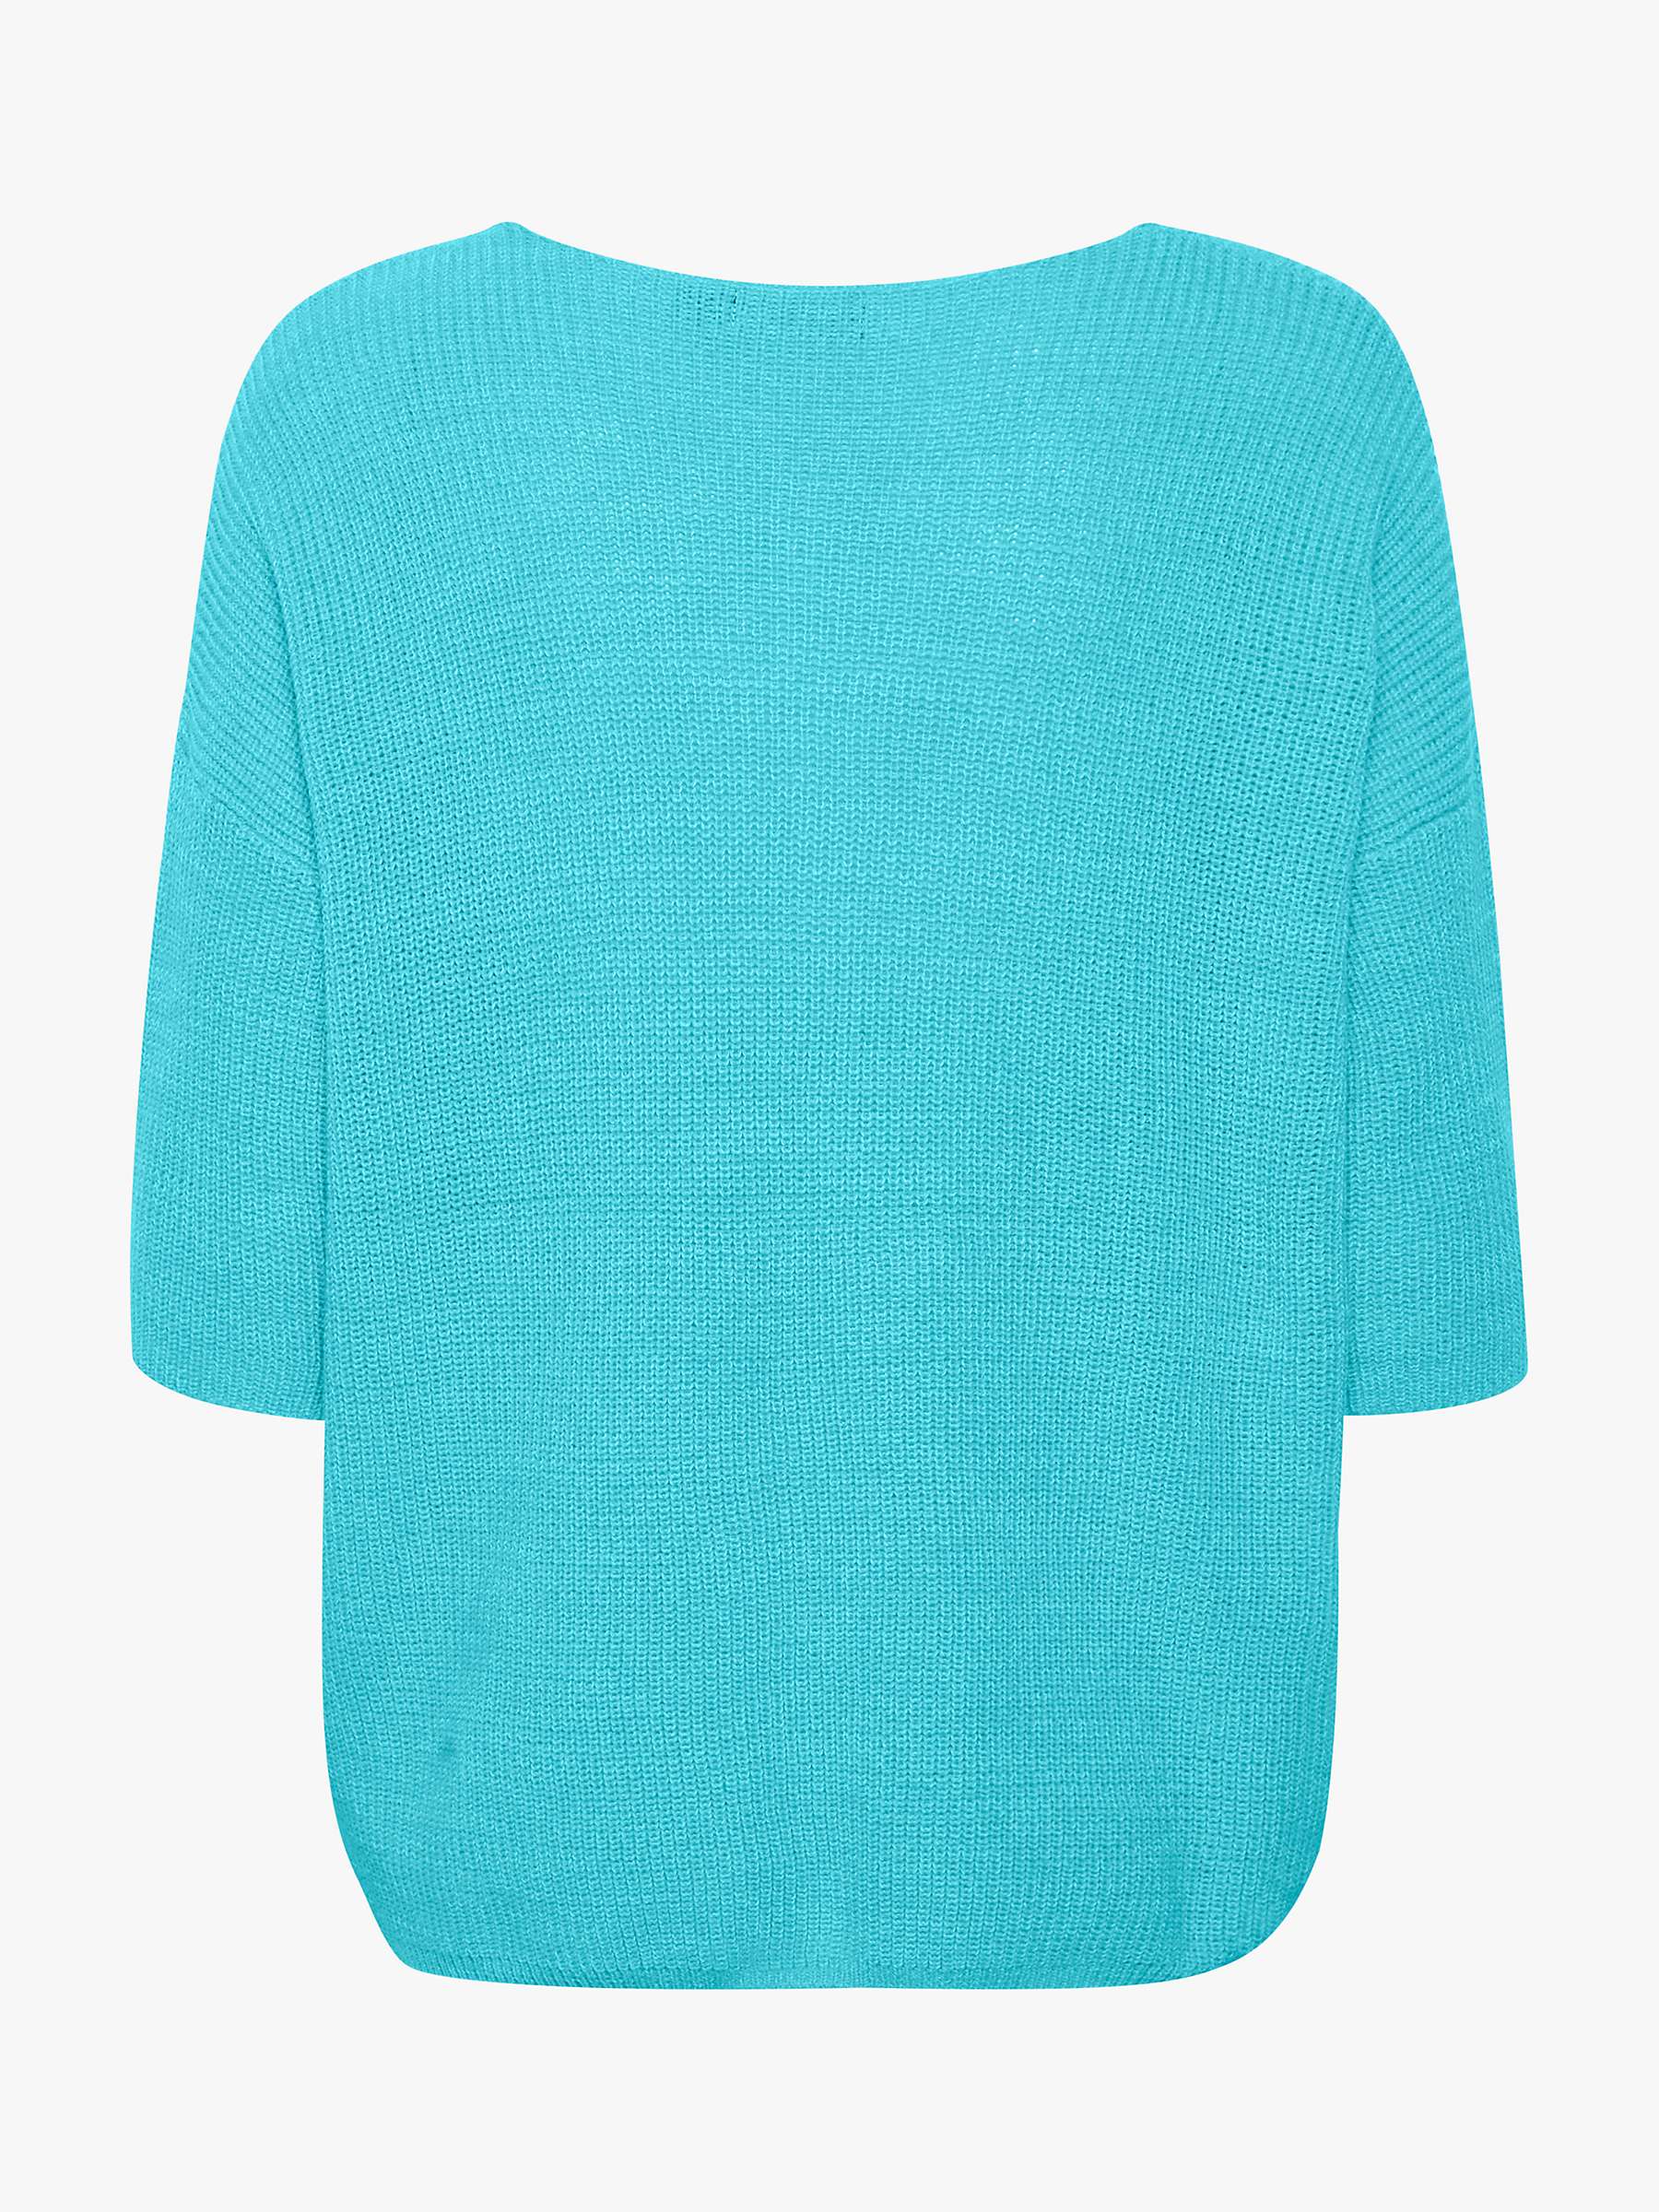 Buy Soaked In Luxury Tuesday Cotton Blend Half Sleeve Jumper, Sea Jet Online at johnlewis.com